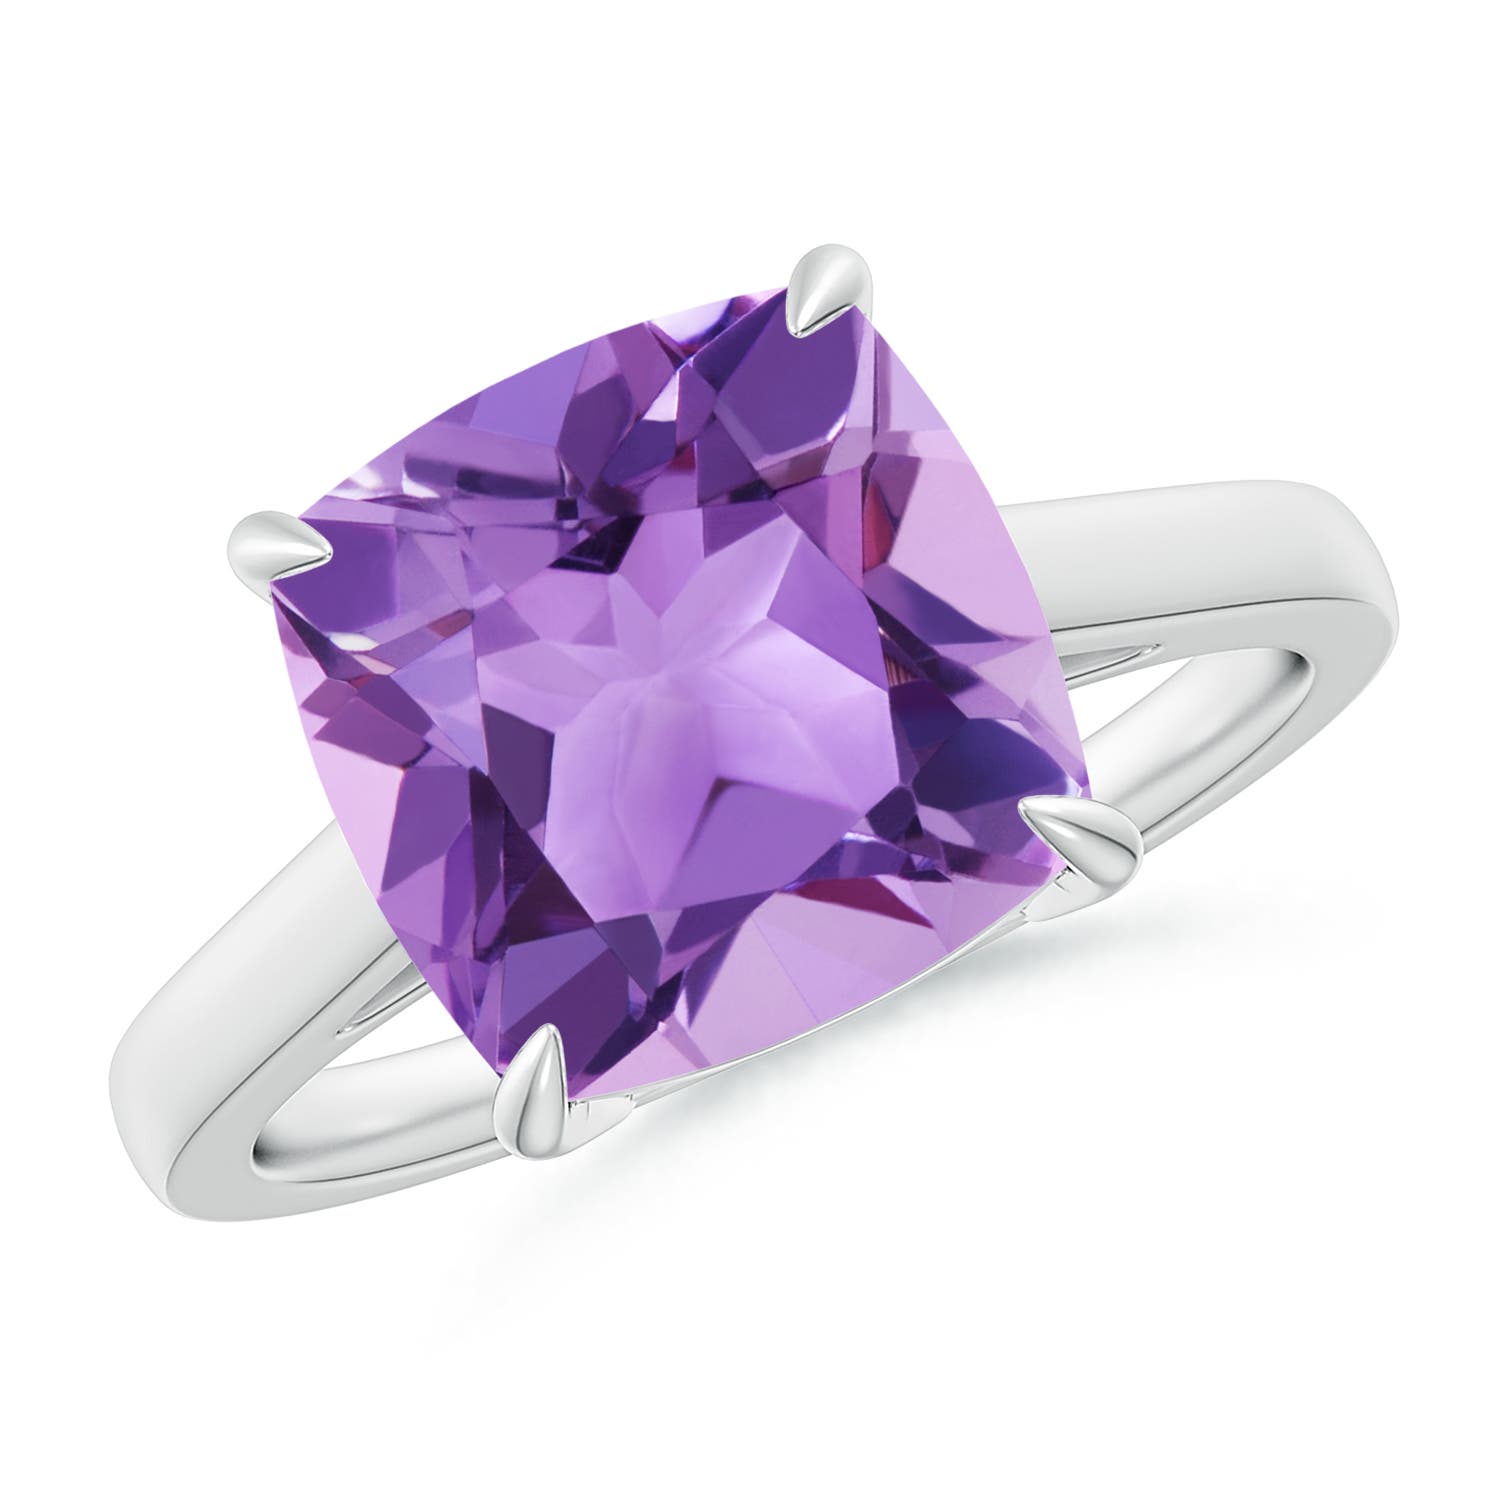 A - Amethyst / 3.65 CT / 14 KT White Gold